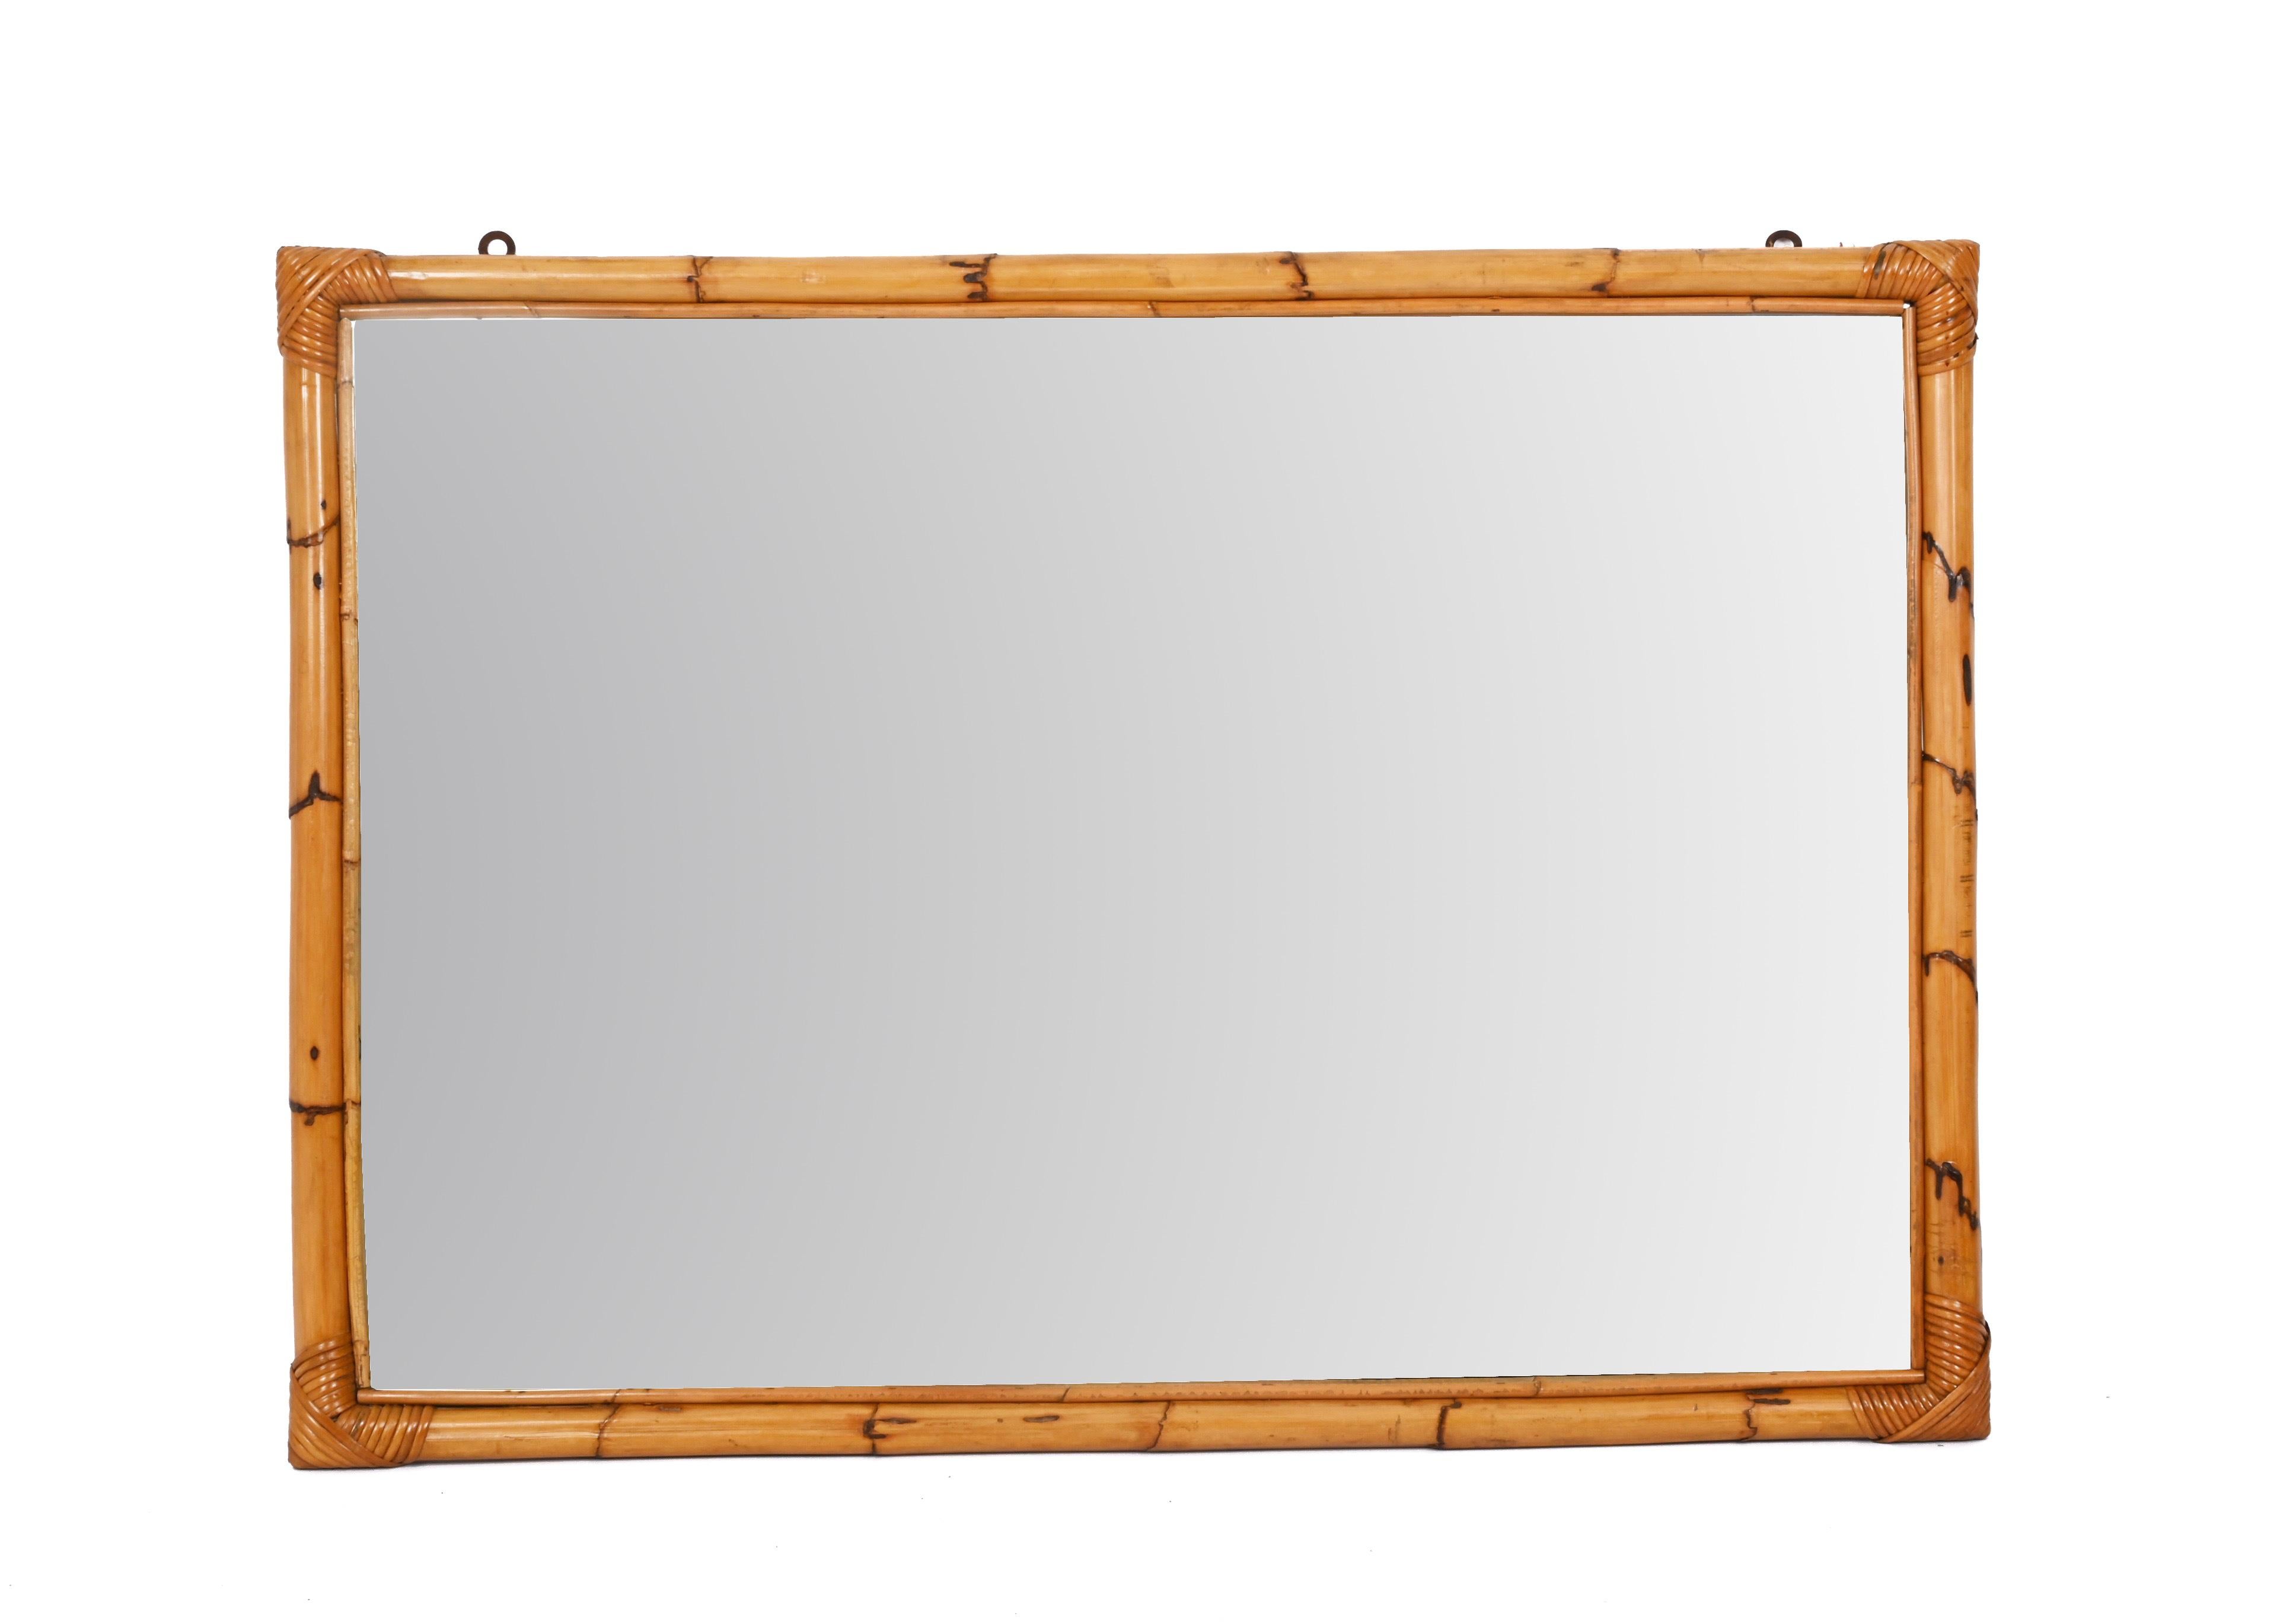 Midcentury Large Rectangular Italian Mirror with Double Bamboo Cane Frame, 1970s For Sale 5